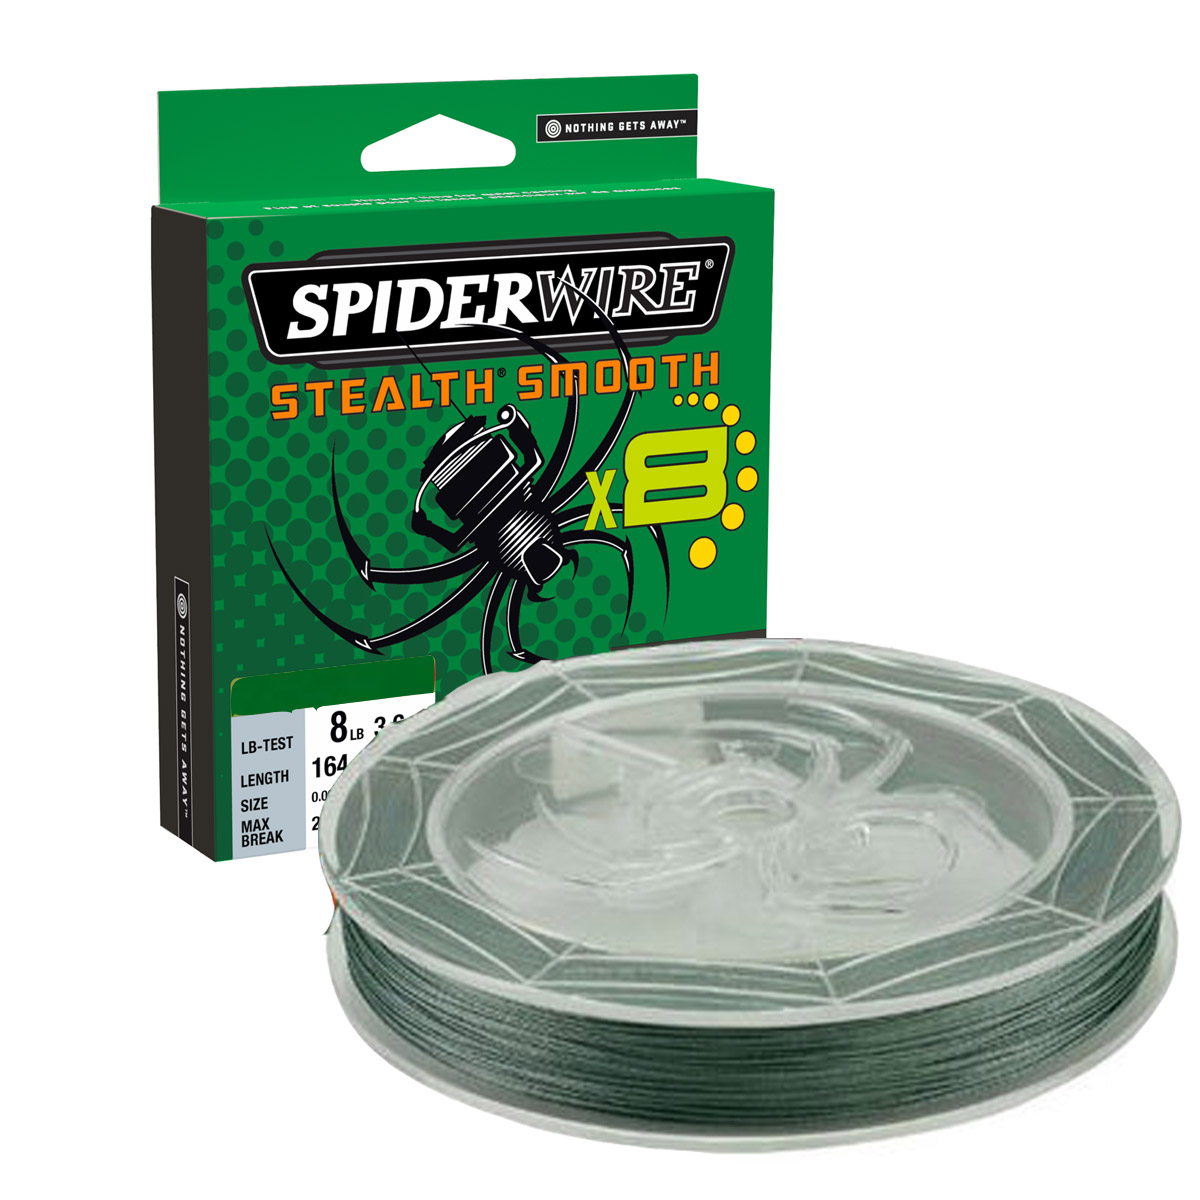 Spiderwire Stealth Smooth 8 Moss Green 150 M -  0.15 mm -  0.11 mm -  0.13 mm -  0.19 mm -  0.29 mm -  0.23 mm -  0.06 mm -  0.39 mm -  0.07 mm -  0.33 mm -  0.09 mm